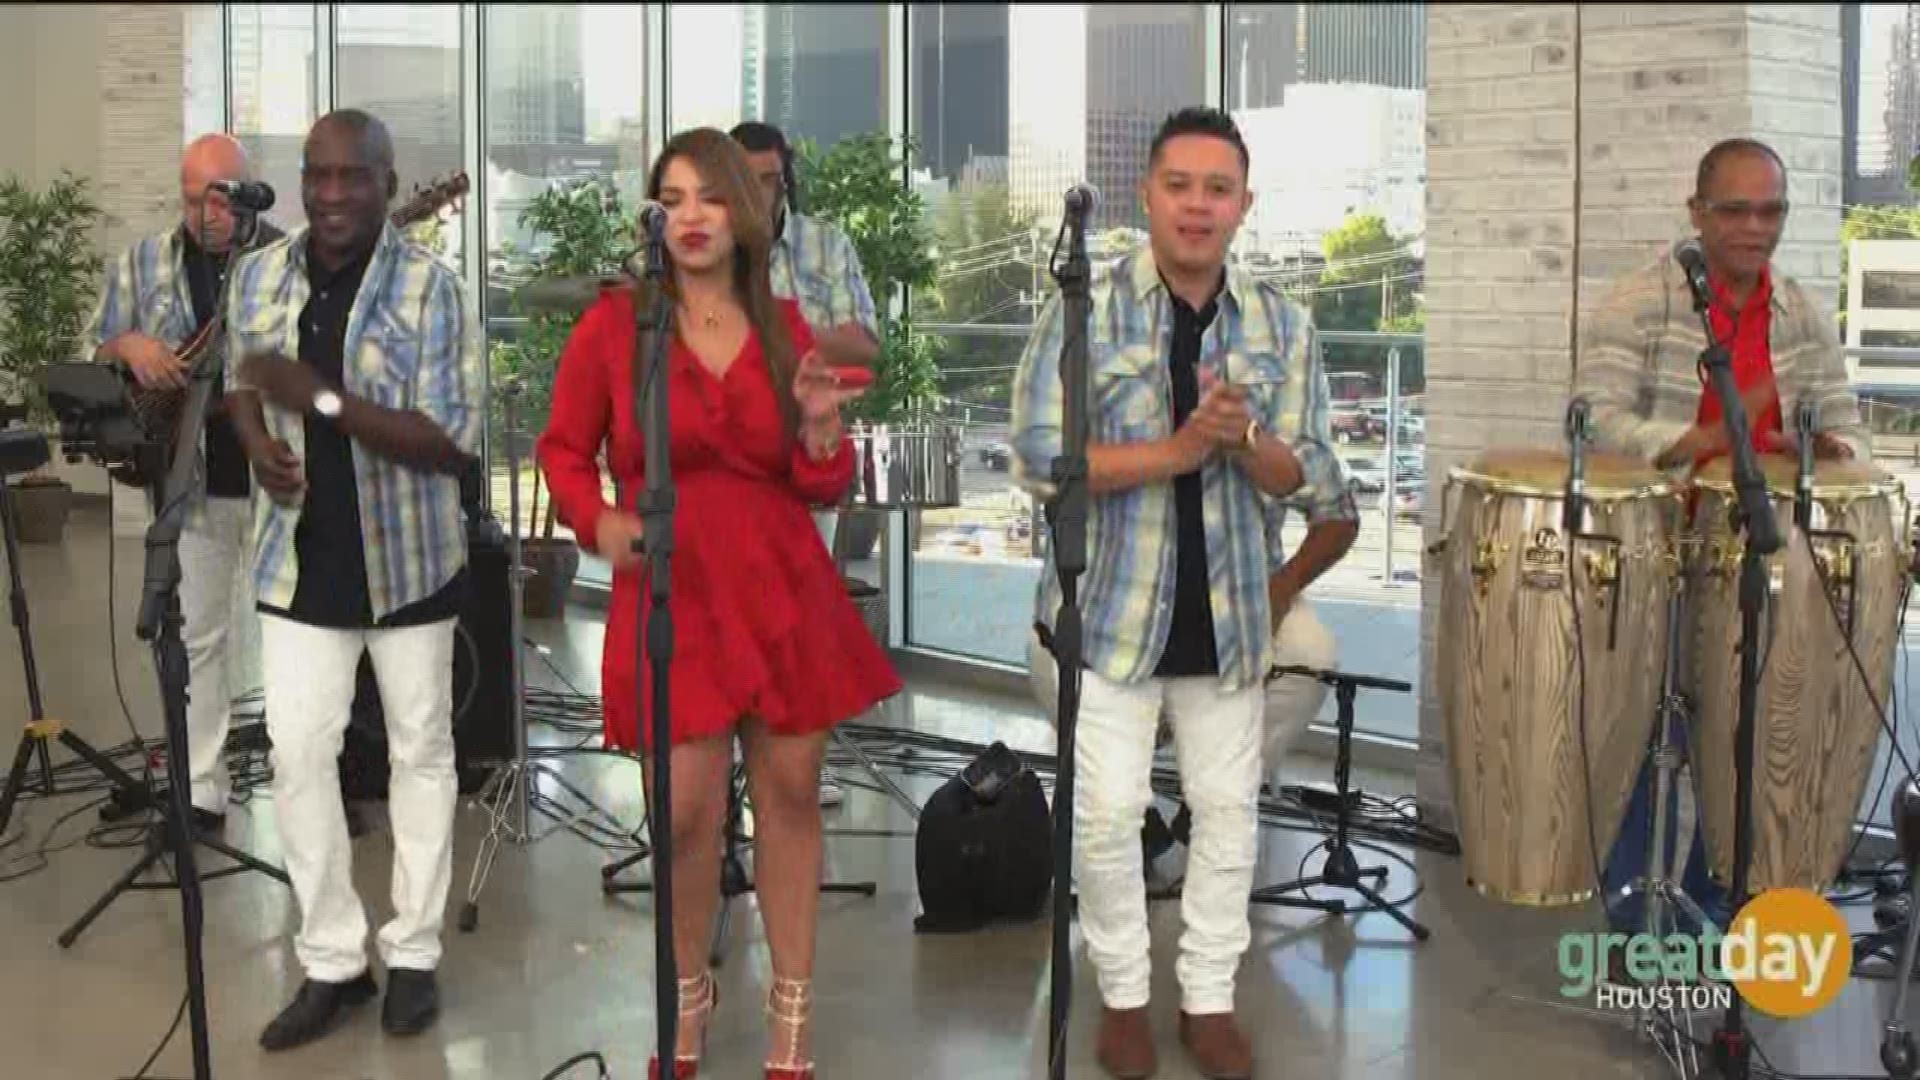 Jorge "Cro Cro" Orta brought his band Tumbaka perform a new song on Great Day Houston to celebrate Hispanic Heritage Month.